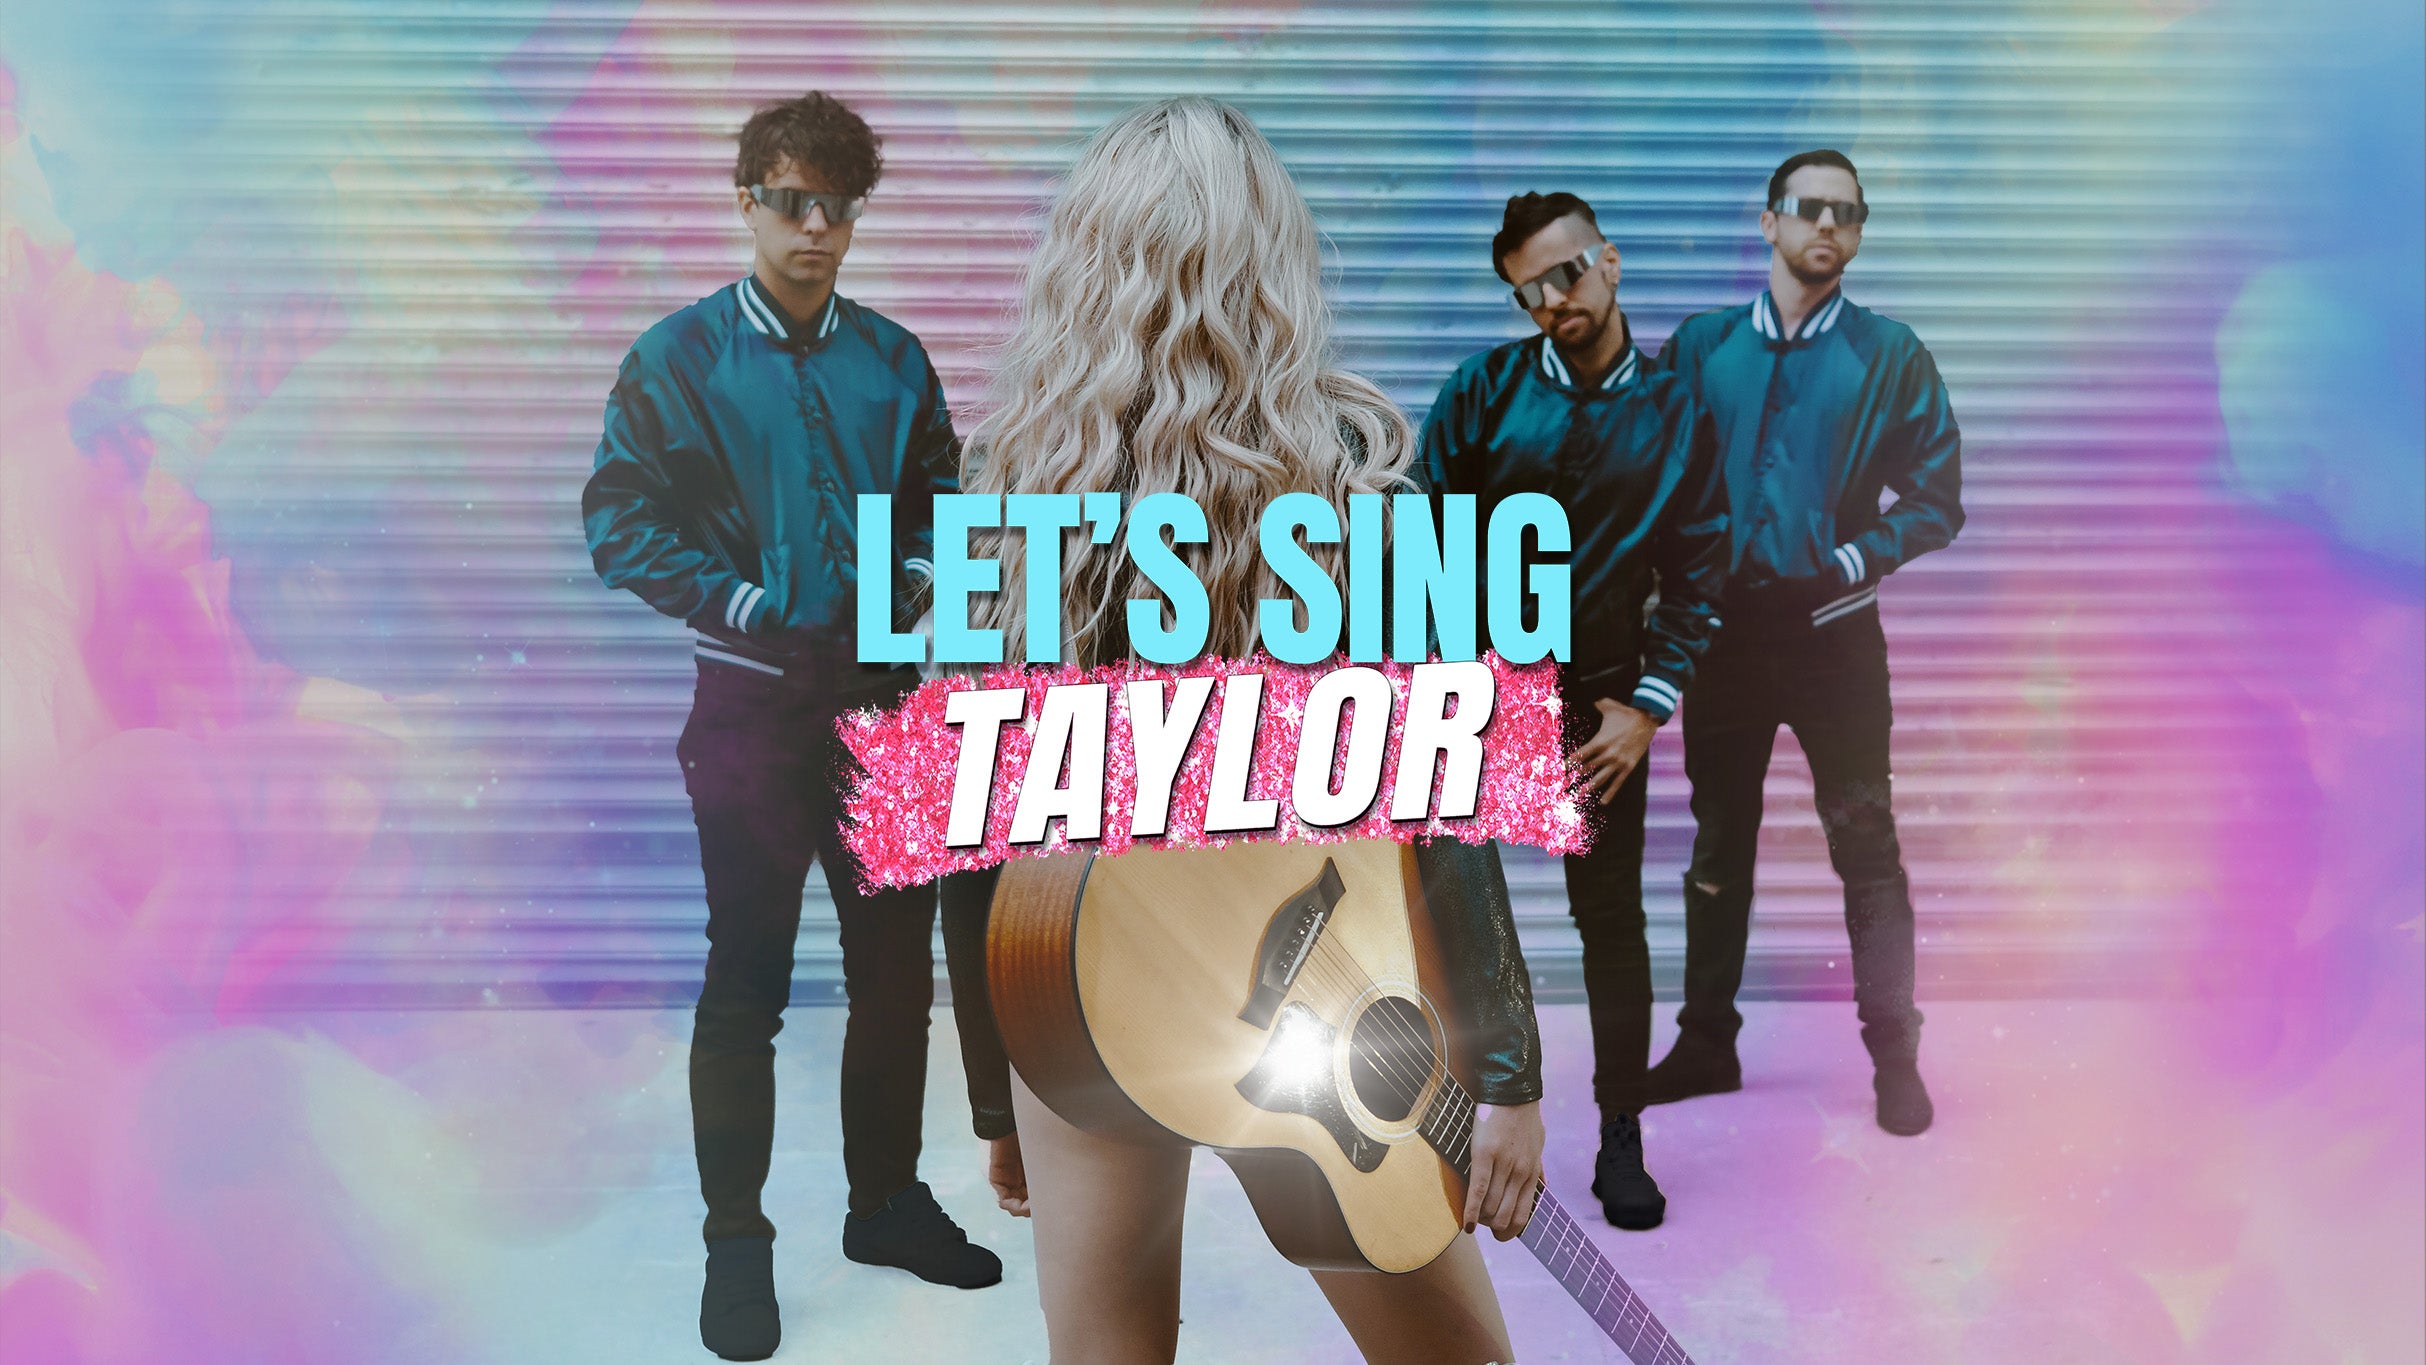 Let’s Sing Taylor - A Live Band Experience Celebrating Taylor Swift presale code for legit tickets in Huntington